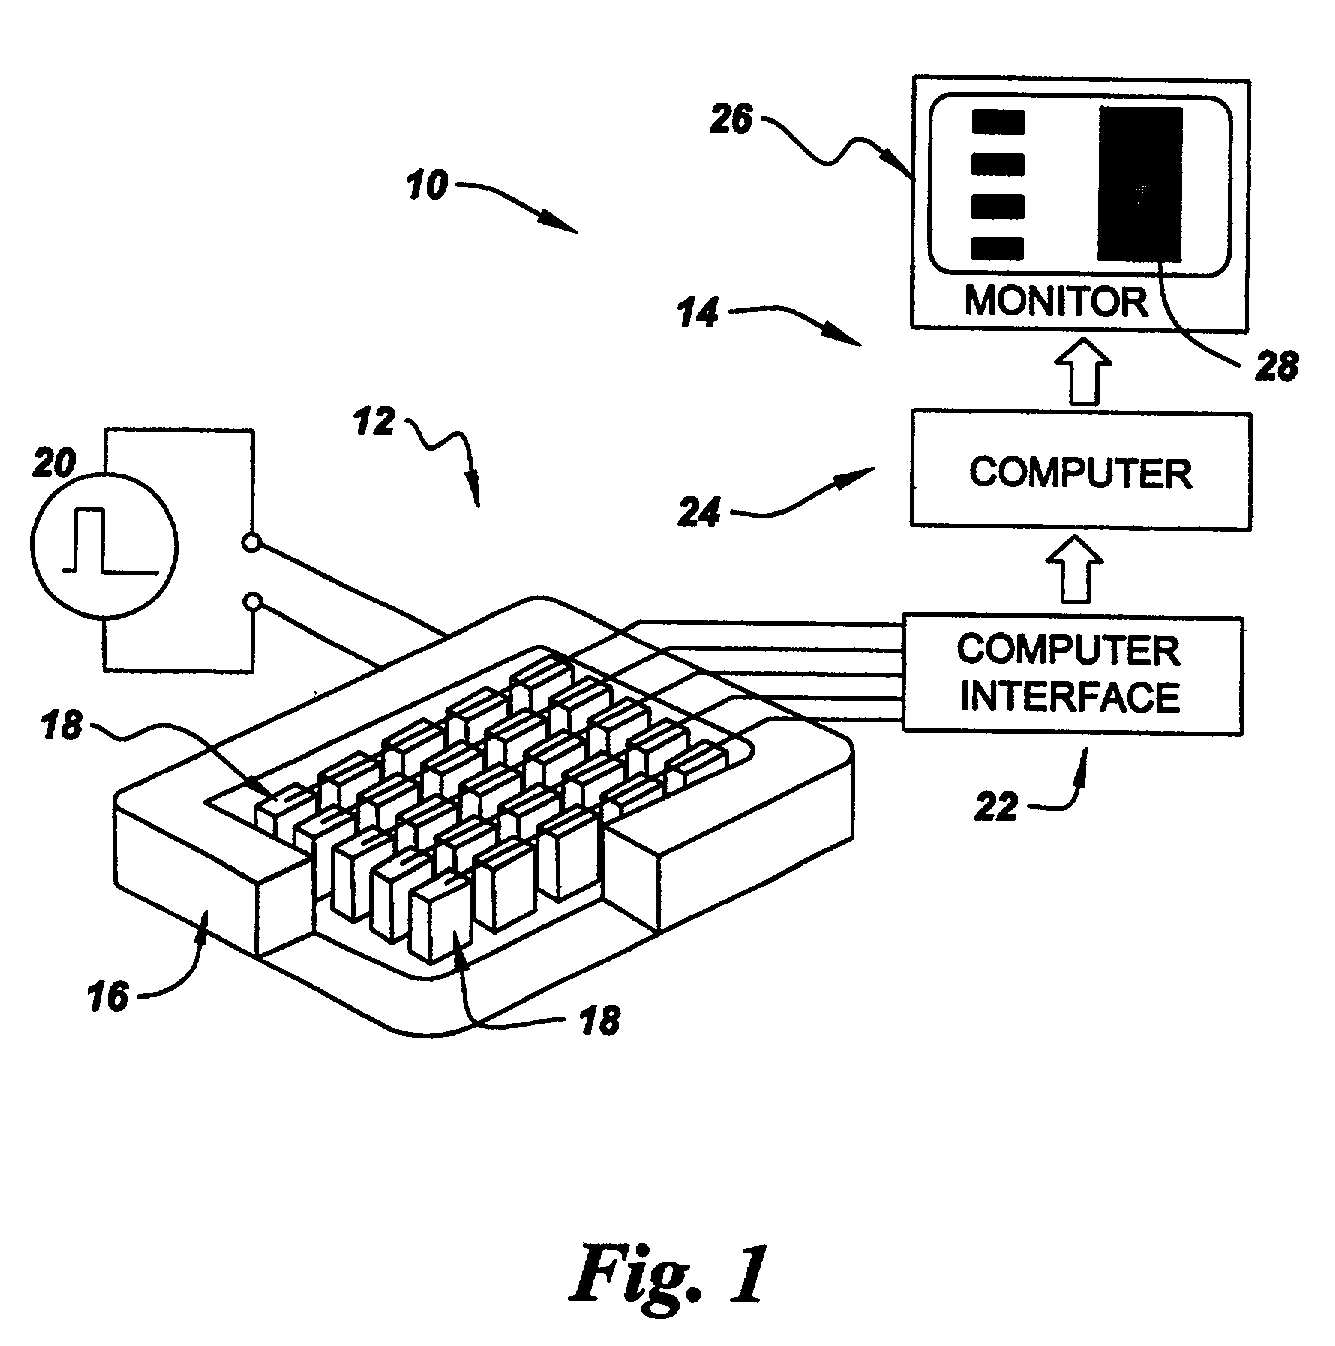 Pulsed eddy current two-dimensional sensor array inspection probe and system